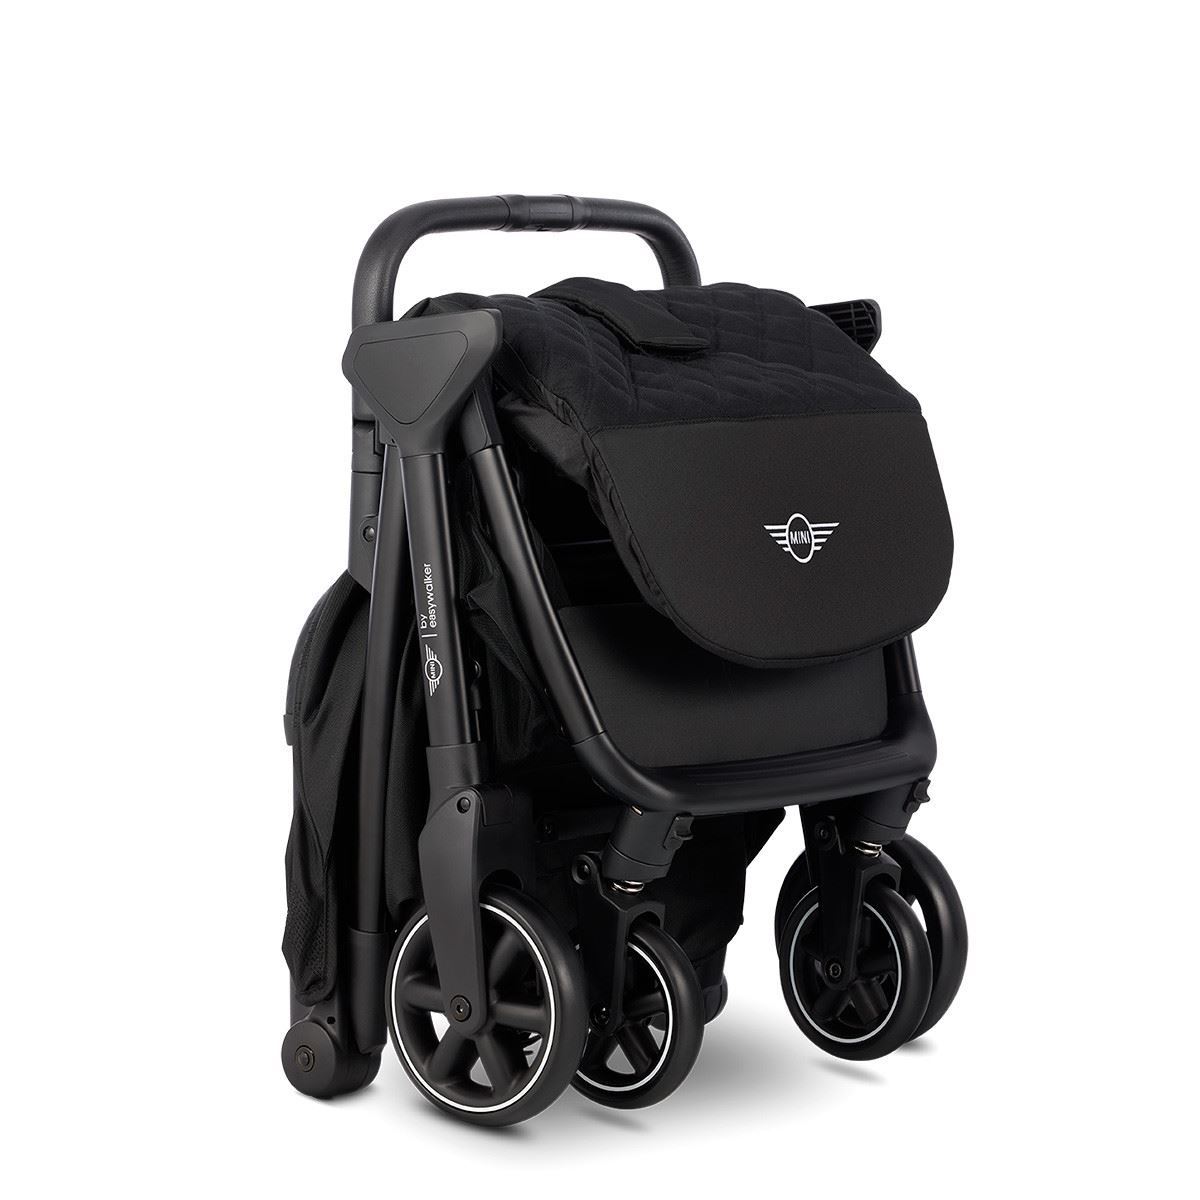 Silla Paseo Mini Buggy Snap Piccadilly black - Imagen 4